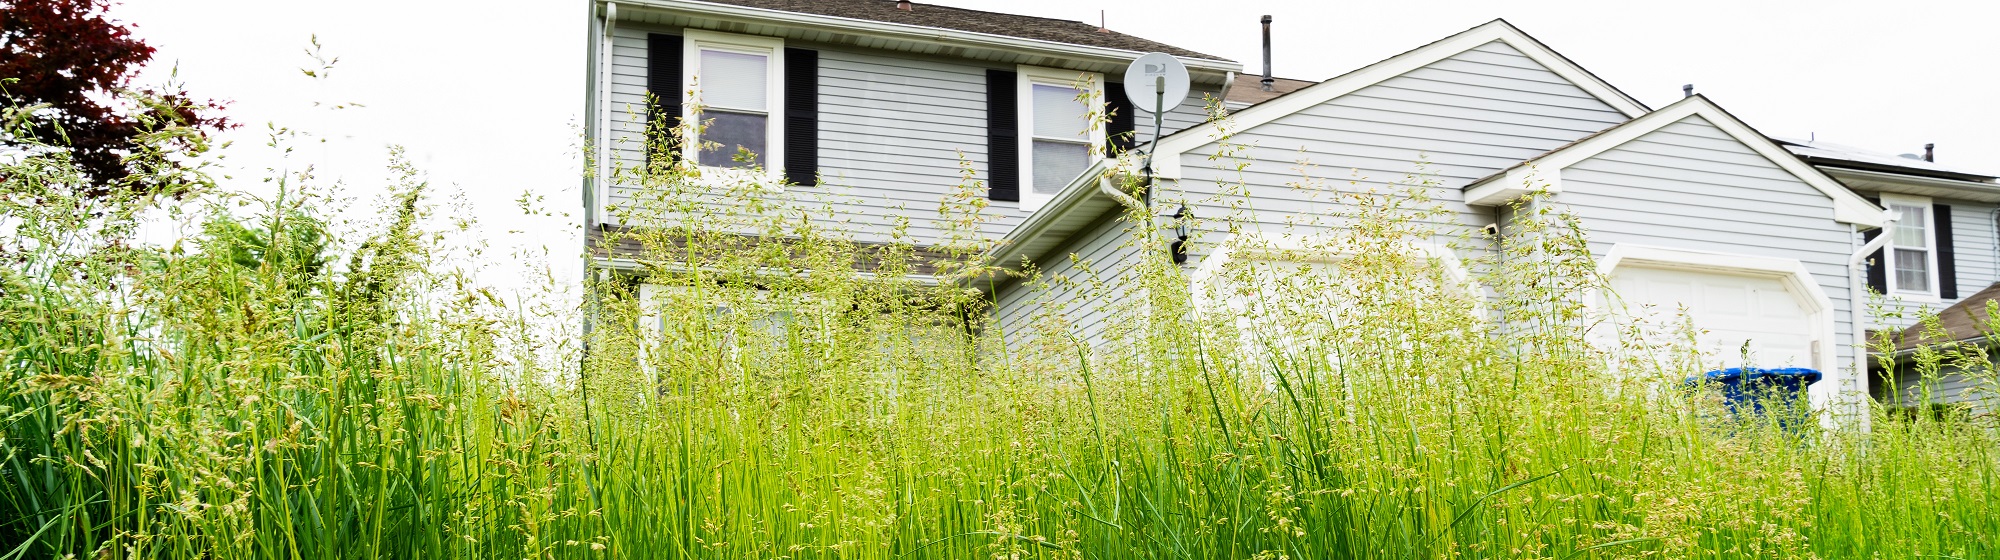 A home with an overgrown lawn